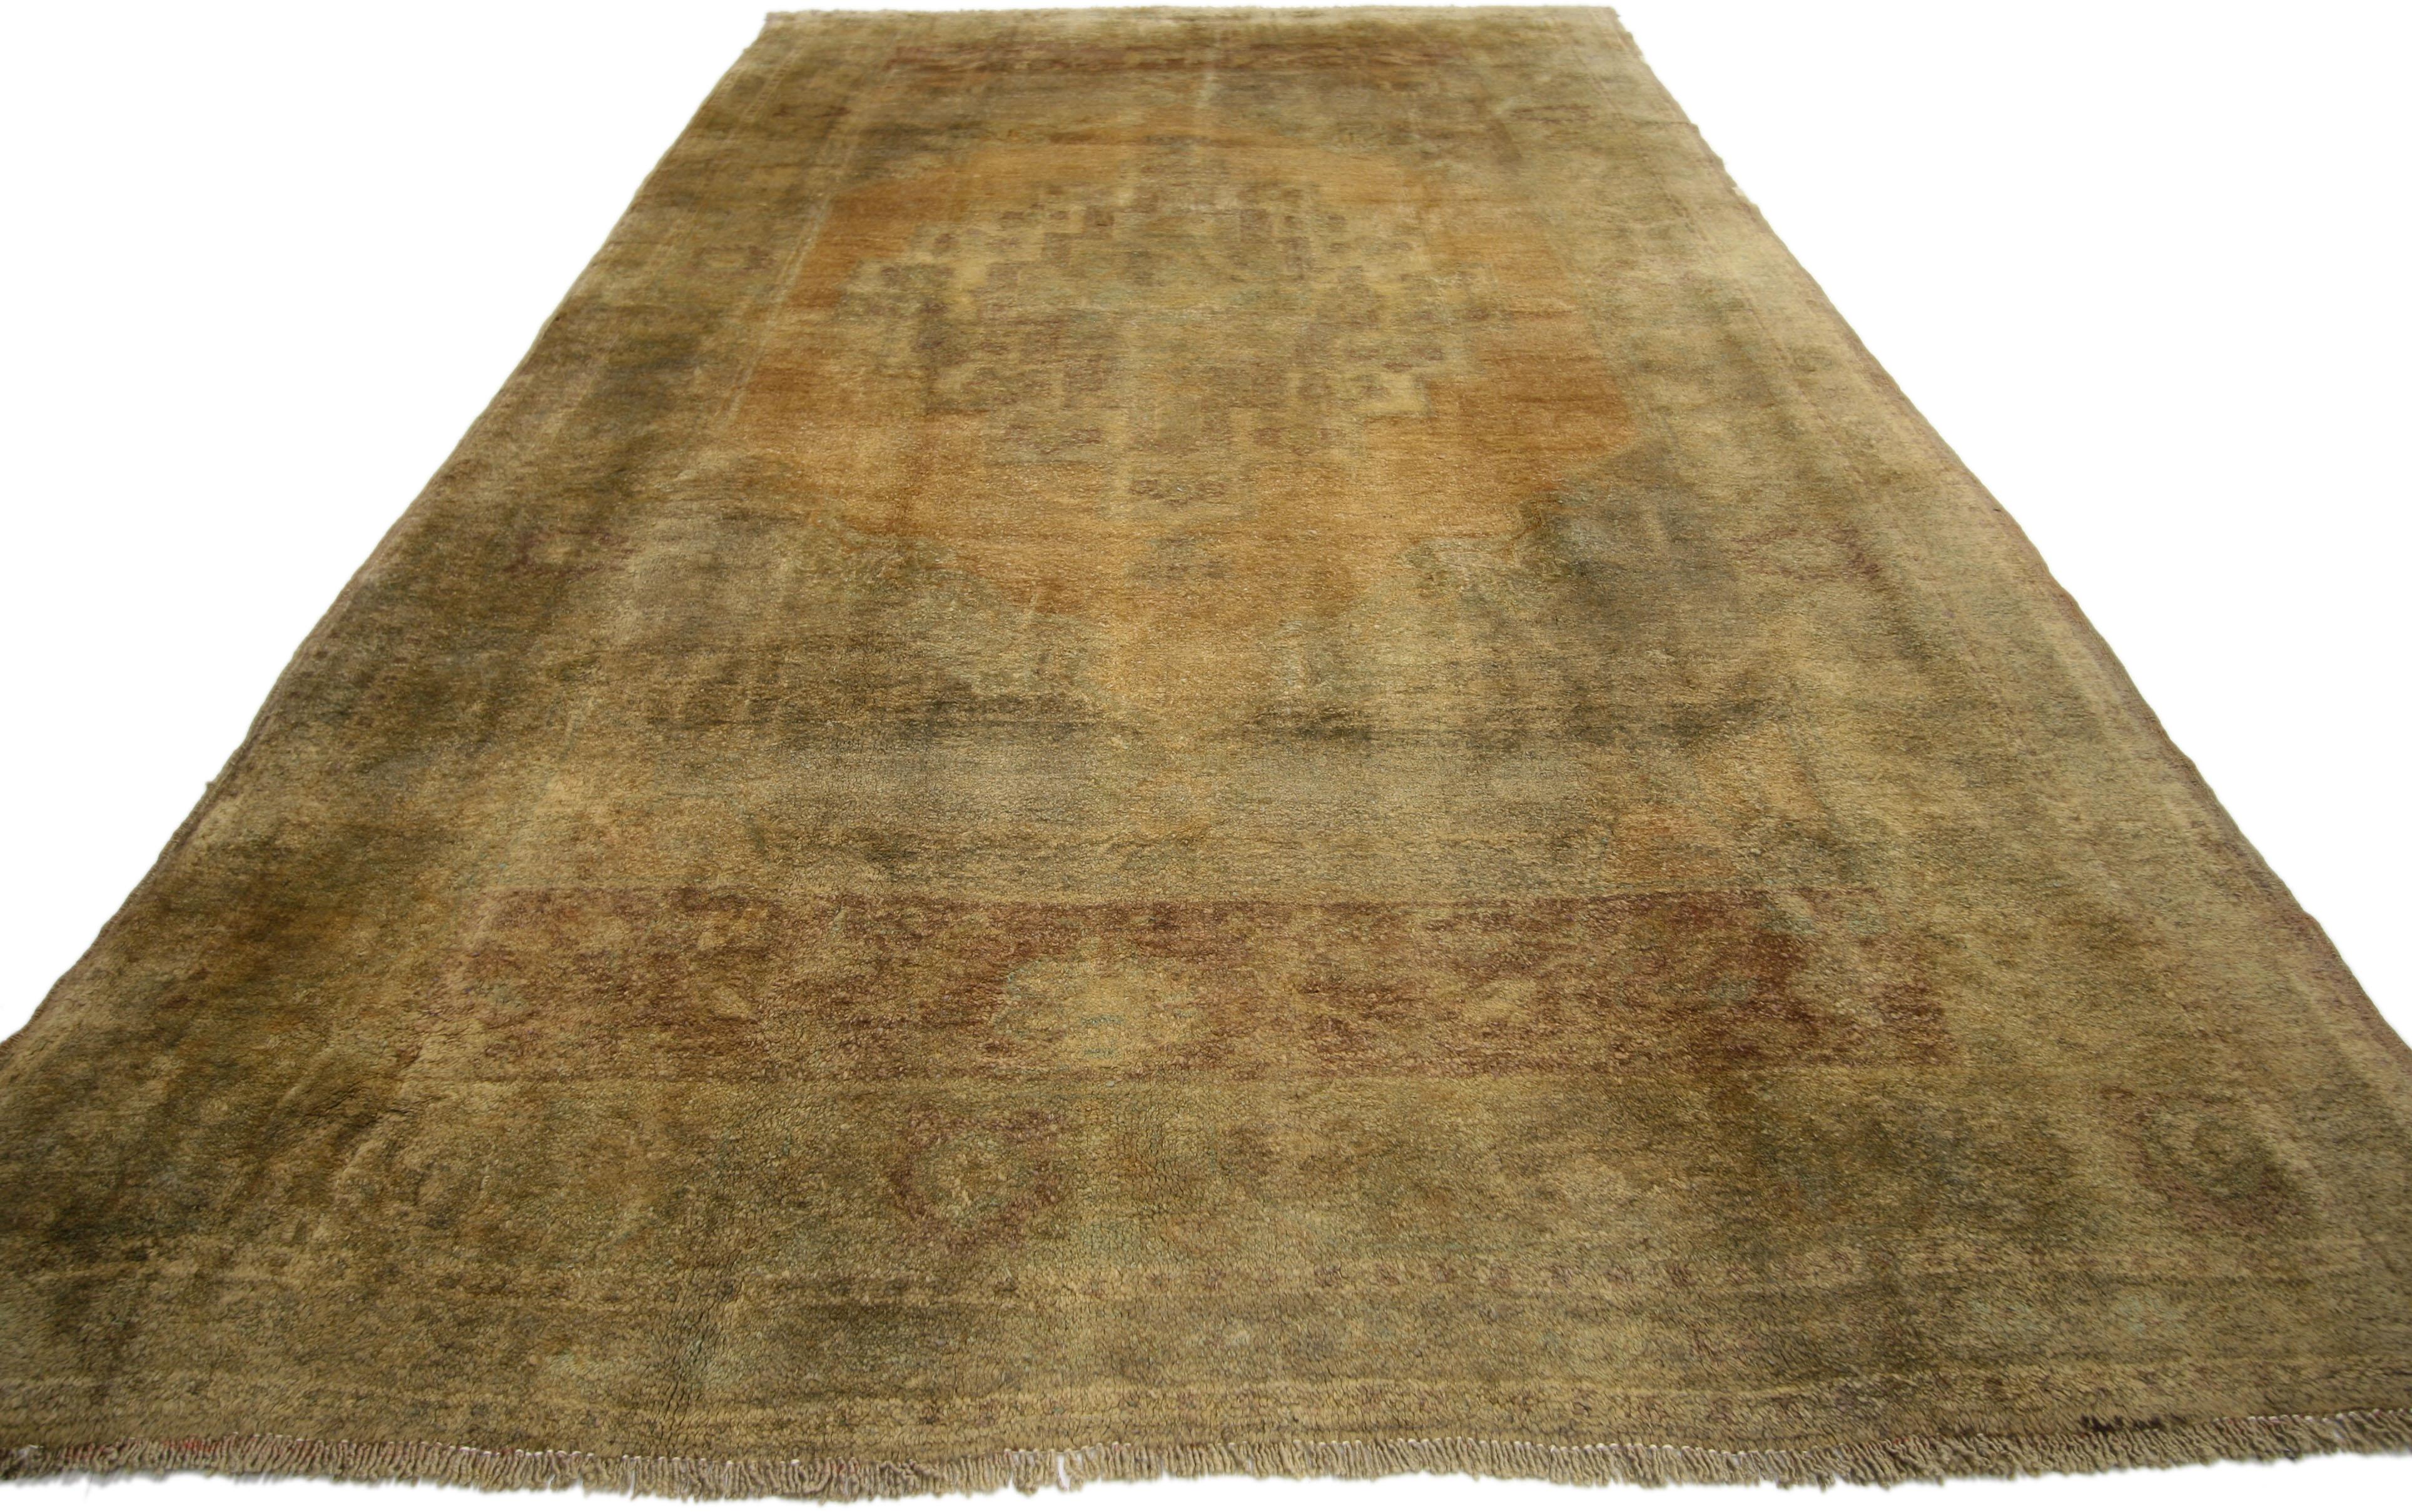 74106, vintage Turkish Oushak rug with Mission style and warm earth-tones. This hand knotted wool vintage Turkish gallery rug features an inconspicuous central medallion in an abrashed golden camel field. It is enclosed with neutral spandrels and